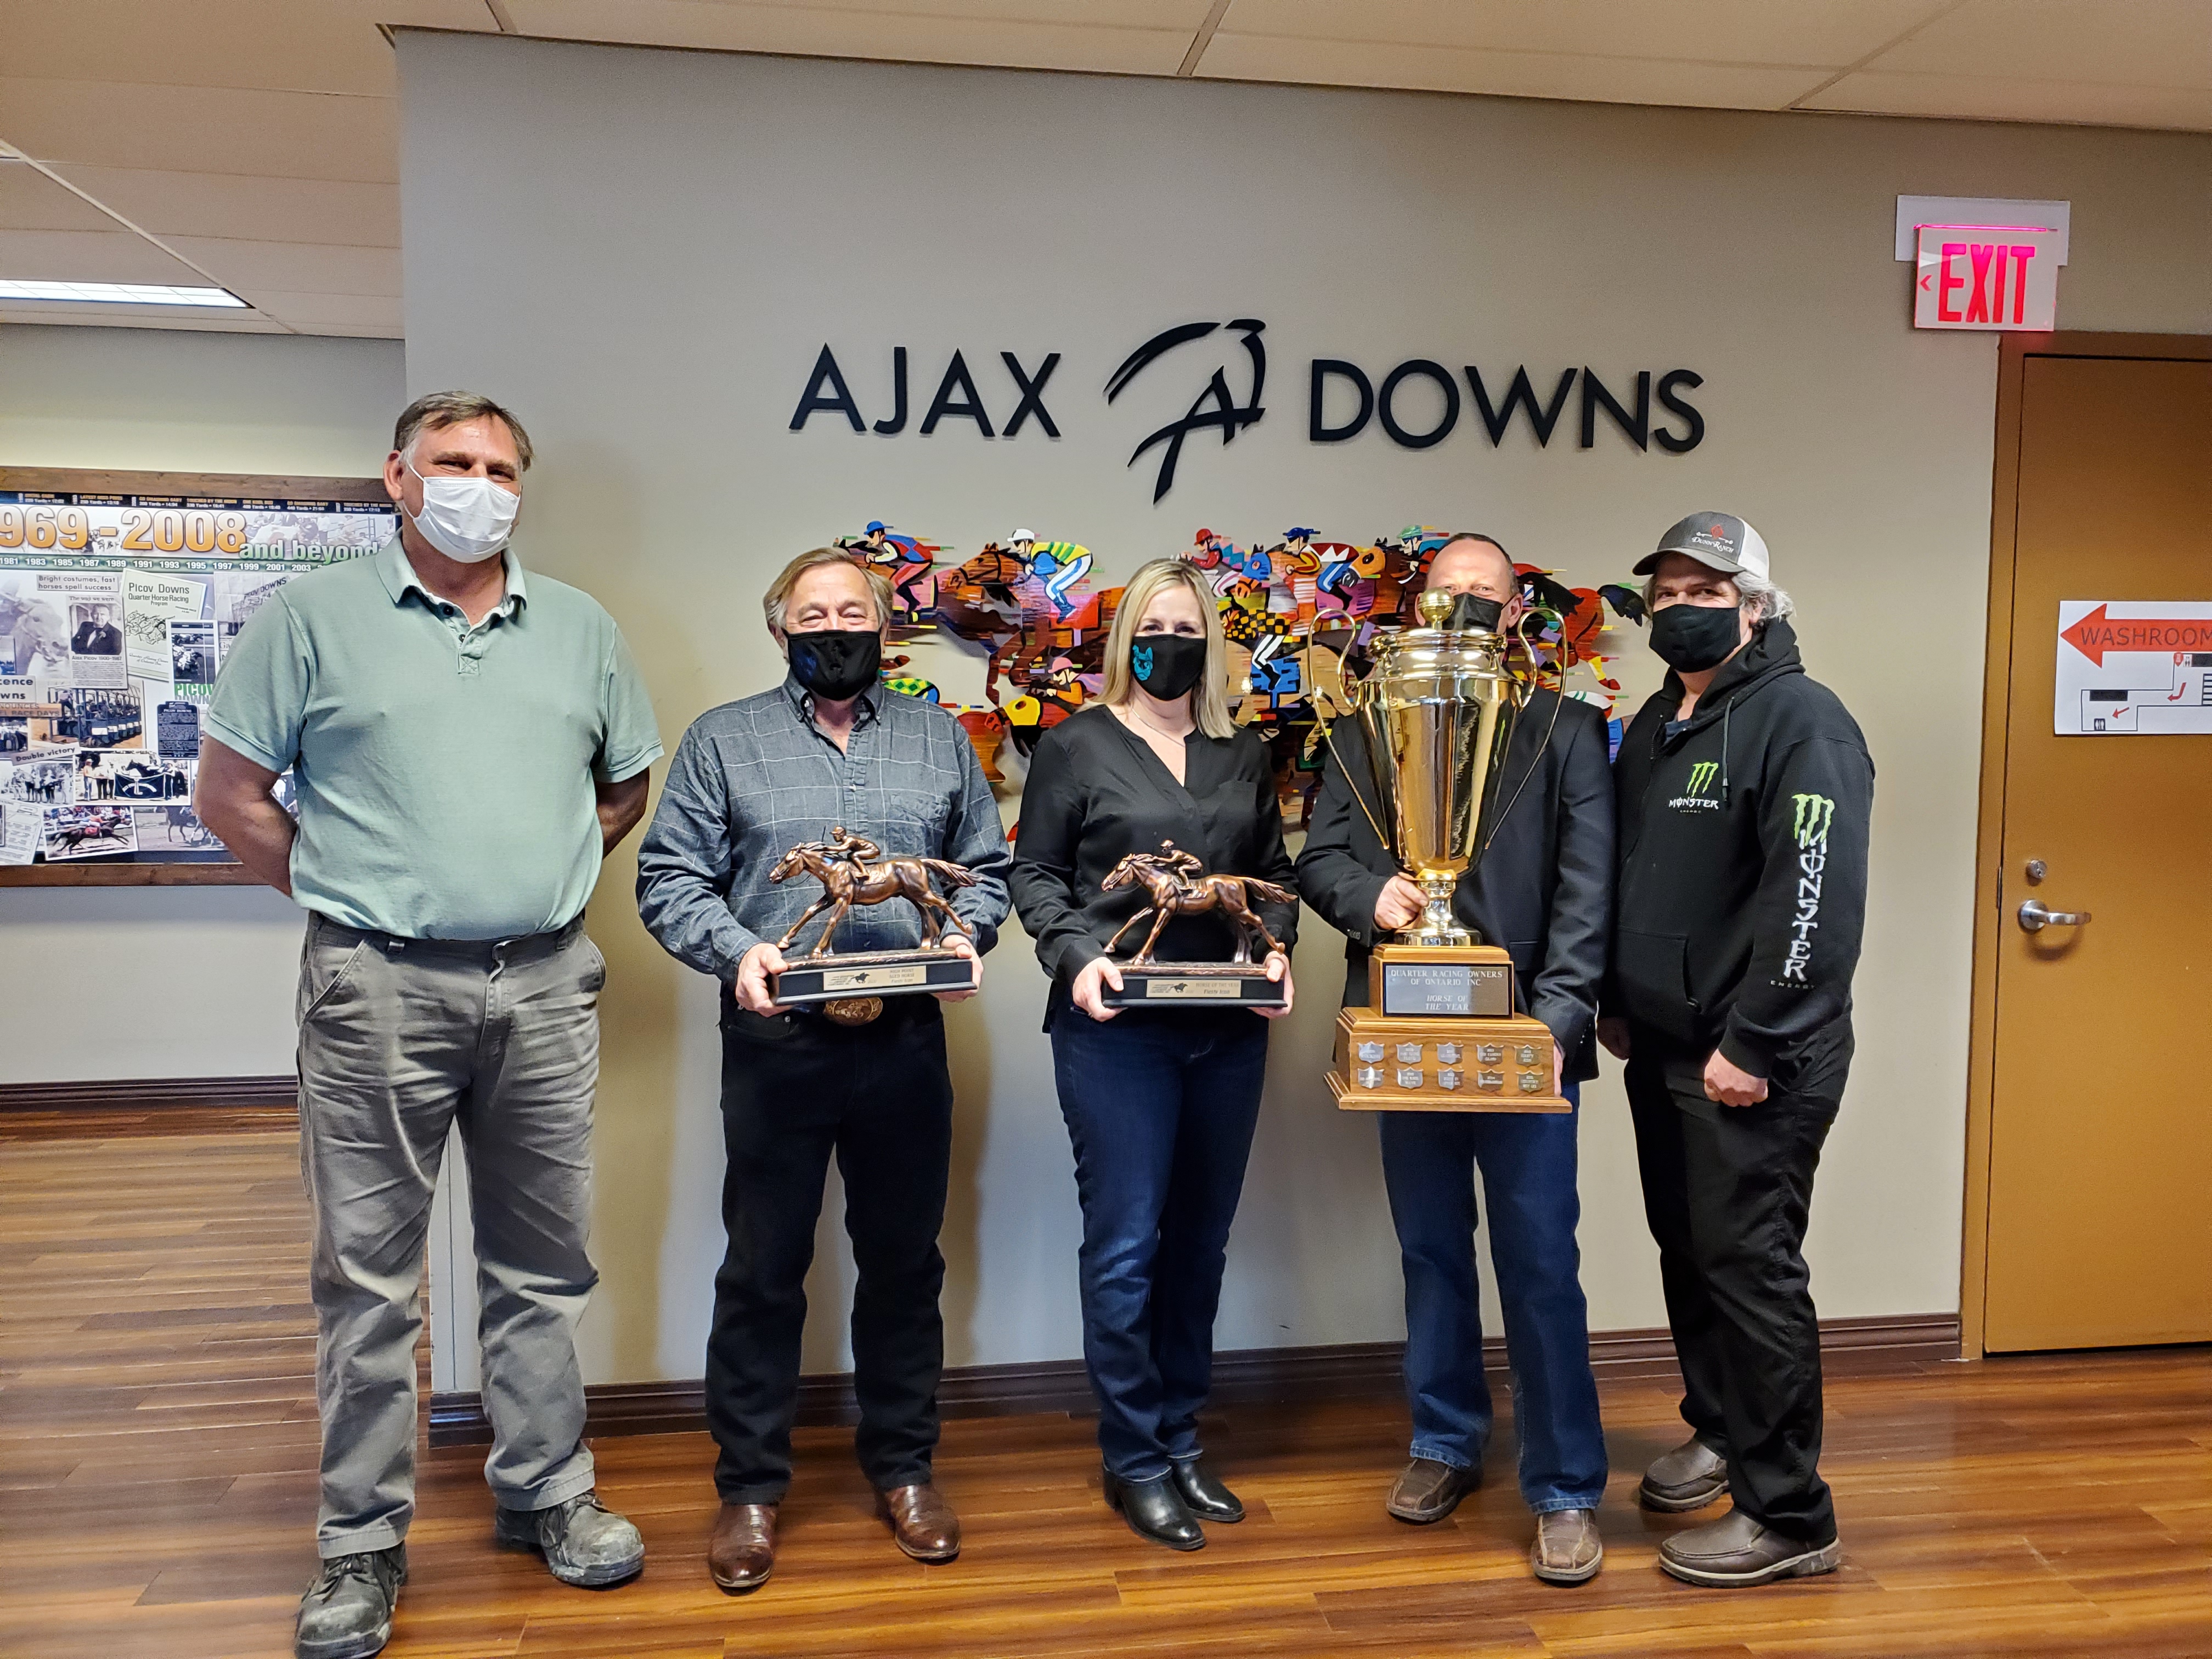 Ontario sired and bred Fiesty Icon Named 2020 Quarter Horse of the Year at Ajax Downs